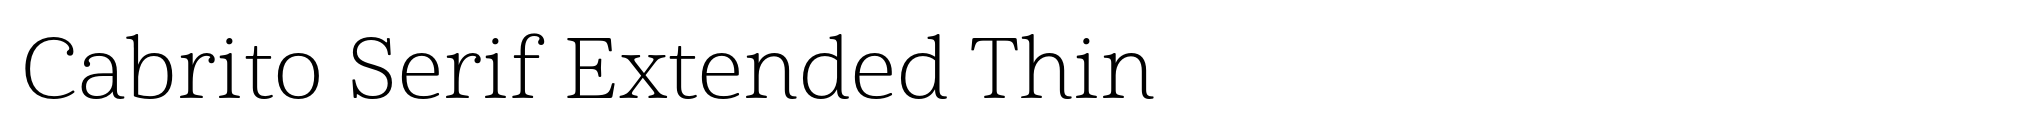 Cabrito Serif Extended Thin image